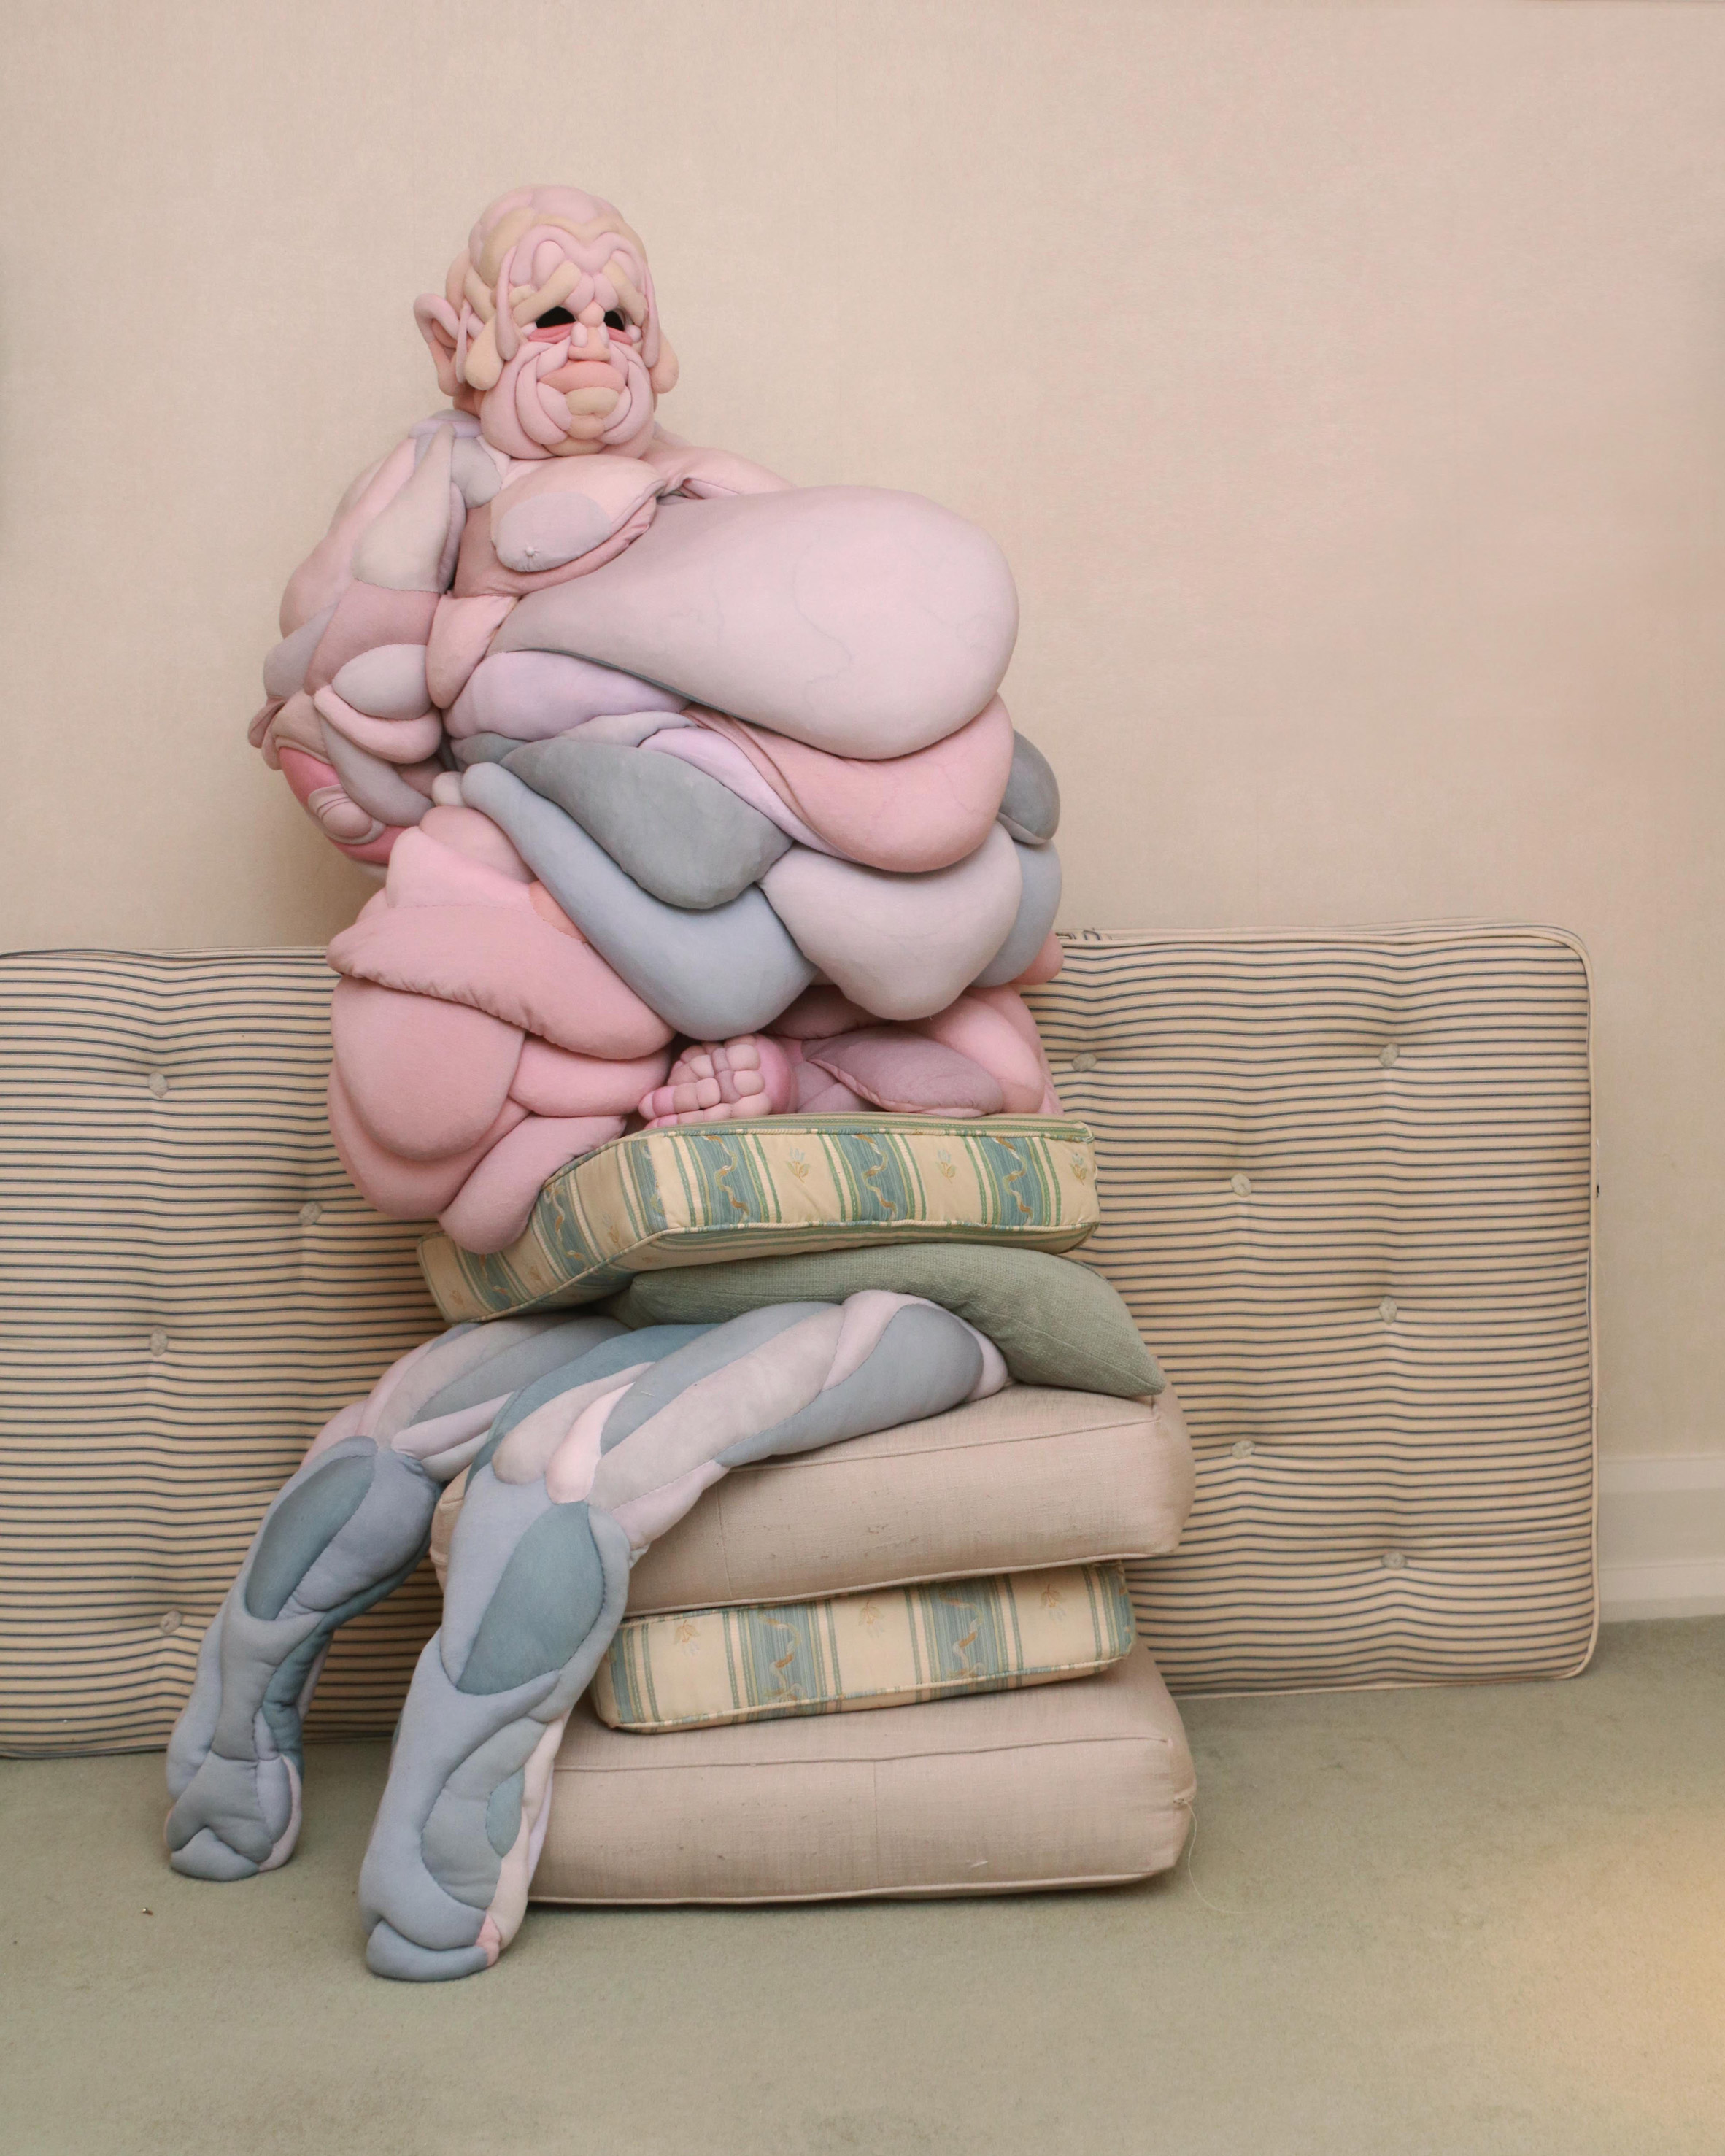 Daisy May Collingridge's "squishy" flesh suits quash the idea of an ideal body type